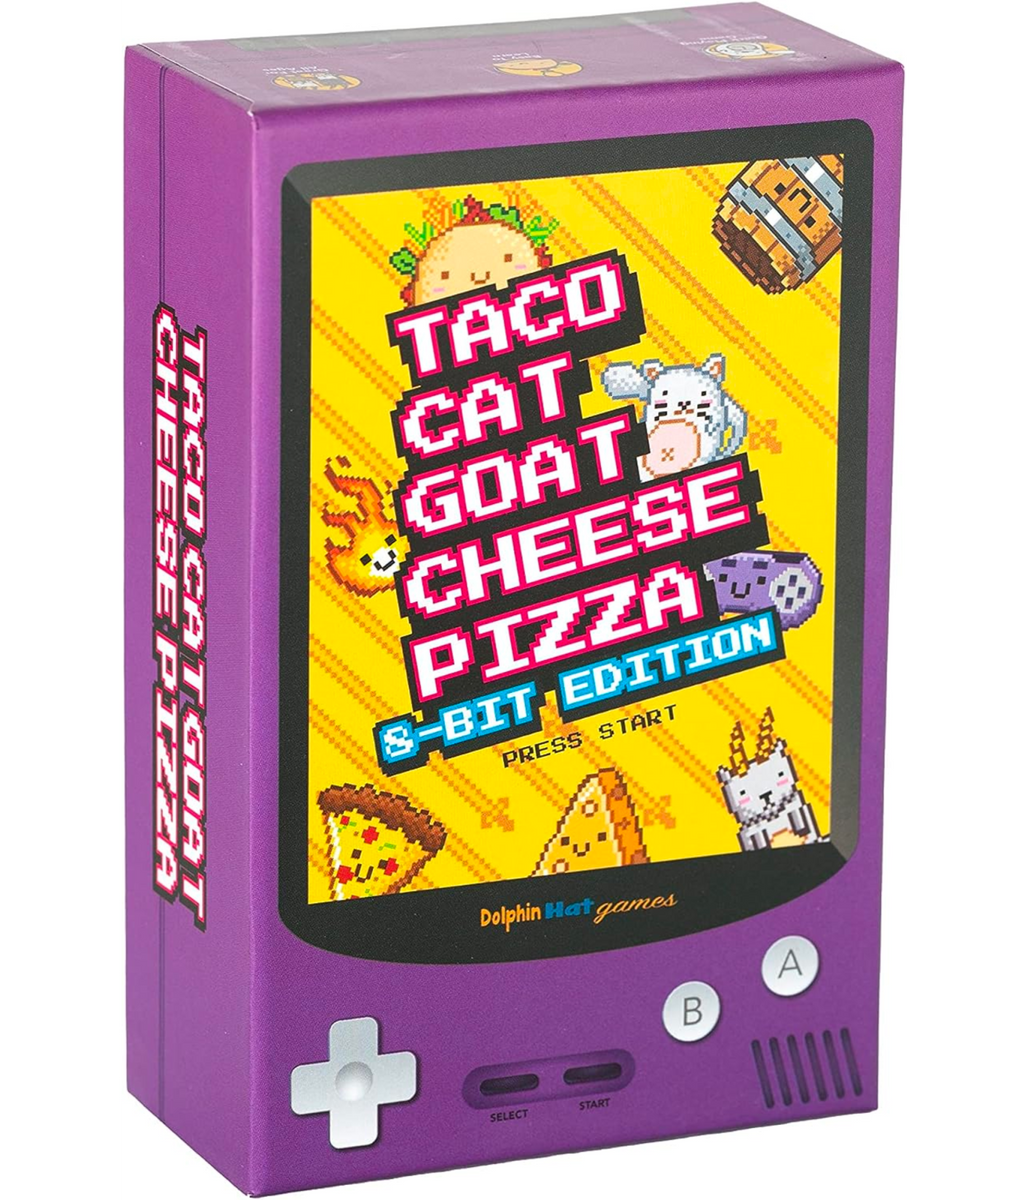 I've played Taco Cat Goat Cheese Pizza, and I love it! — Little Village Toy  & Book Shop